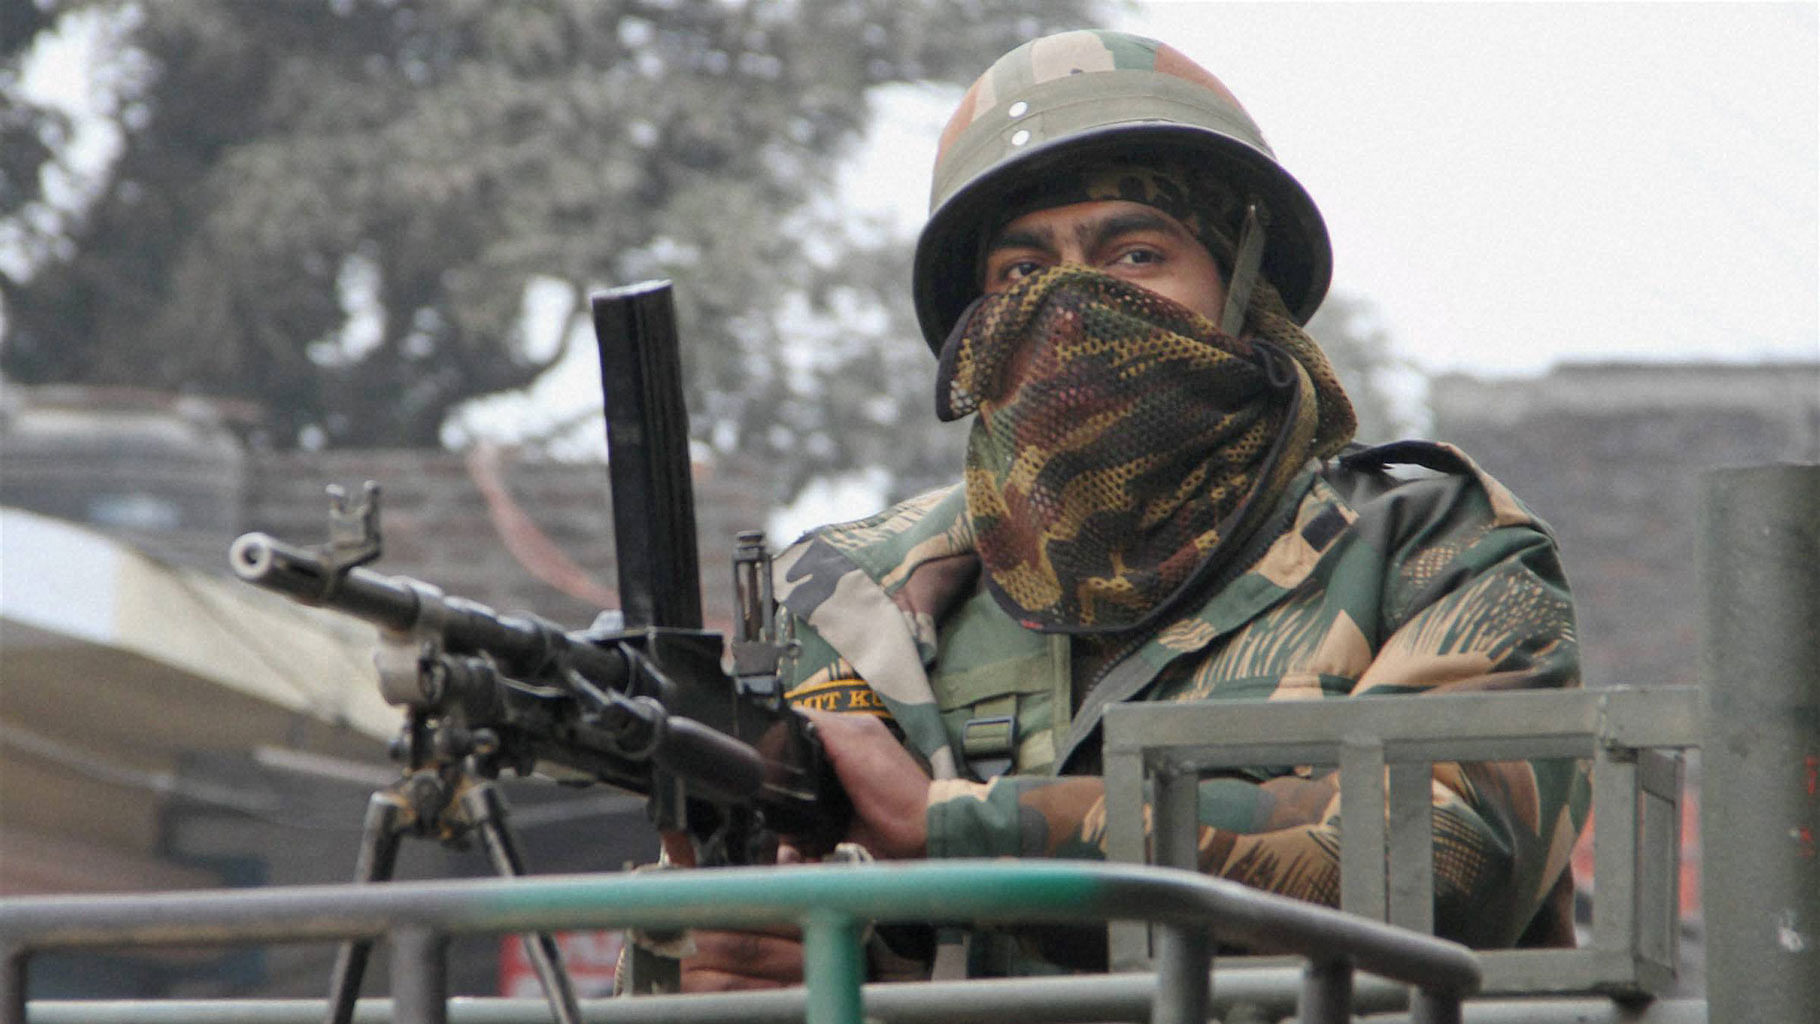  An army person stands guard during the operation against militants at the Indian Air Force base in Pathankot on Monday. (Photo: PTI)